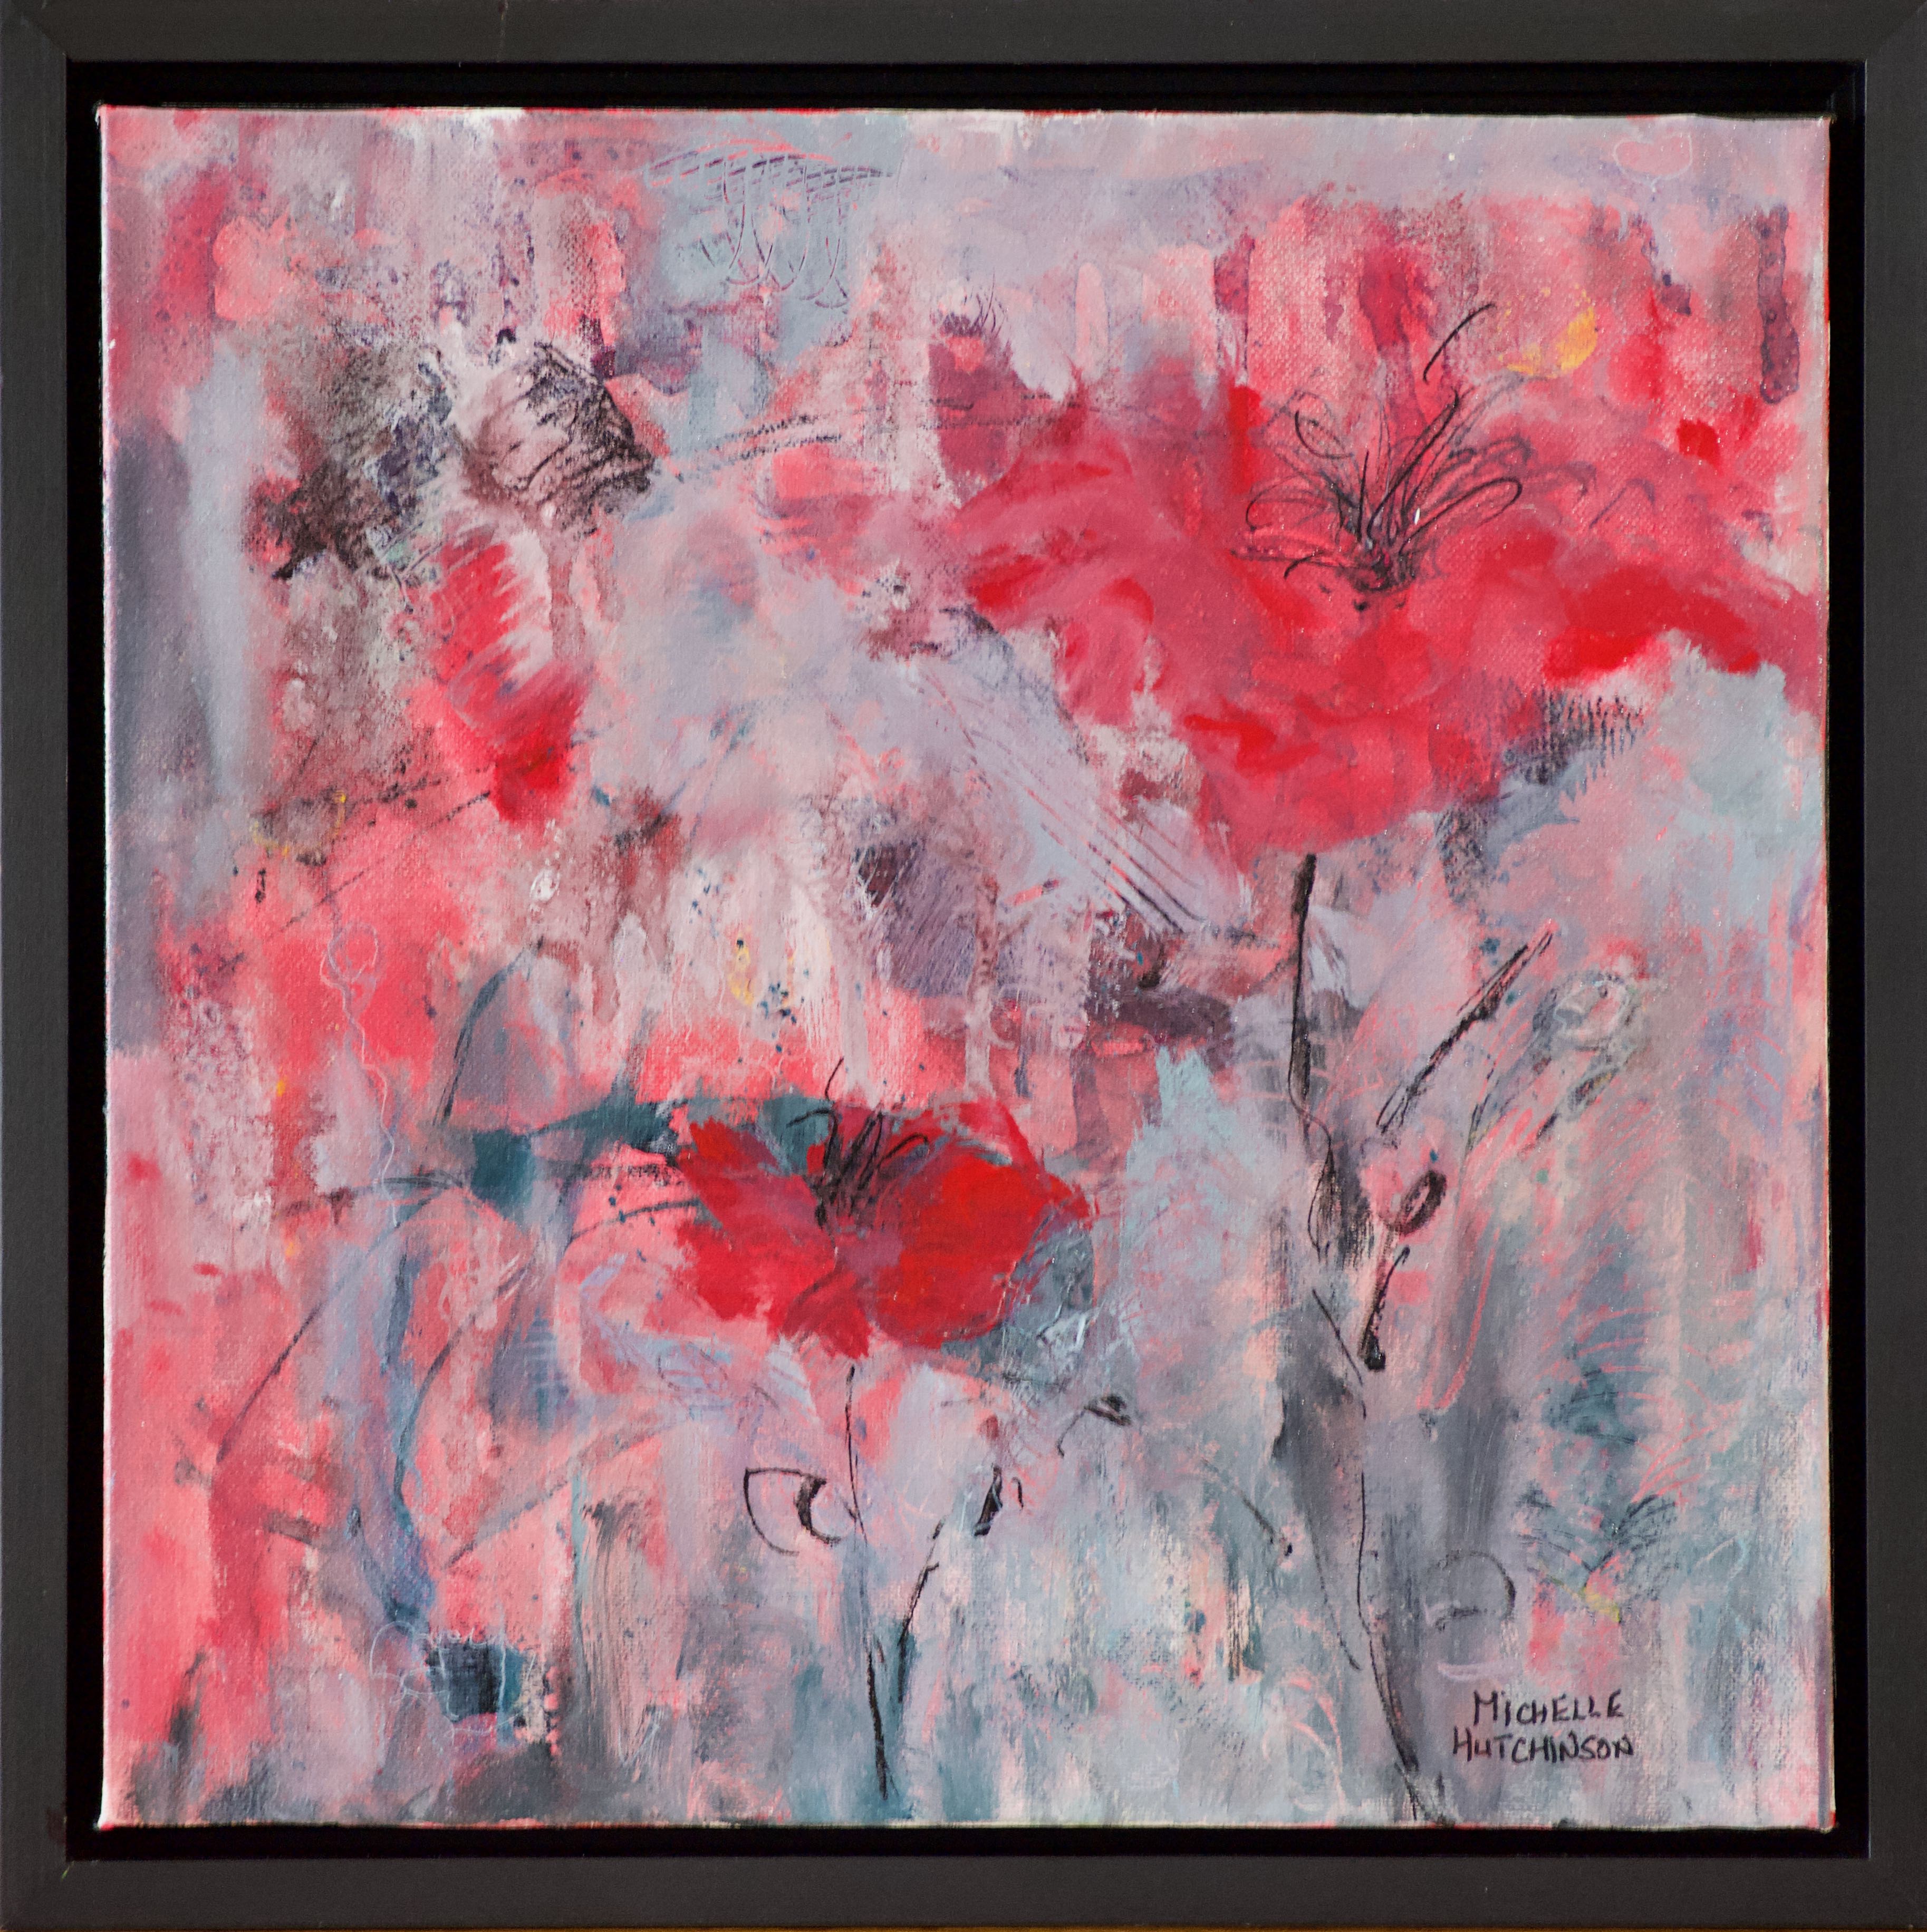 This original painting exudes excitement with its red abstract flowers on a grey and coral background and invites the viewer to be positive no matter the weather. Glossy finish. Includes black floating frame, bumper pads, and pre-mounted wires. Free shipping in N.A. No tax!